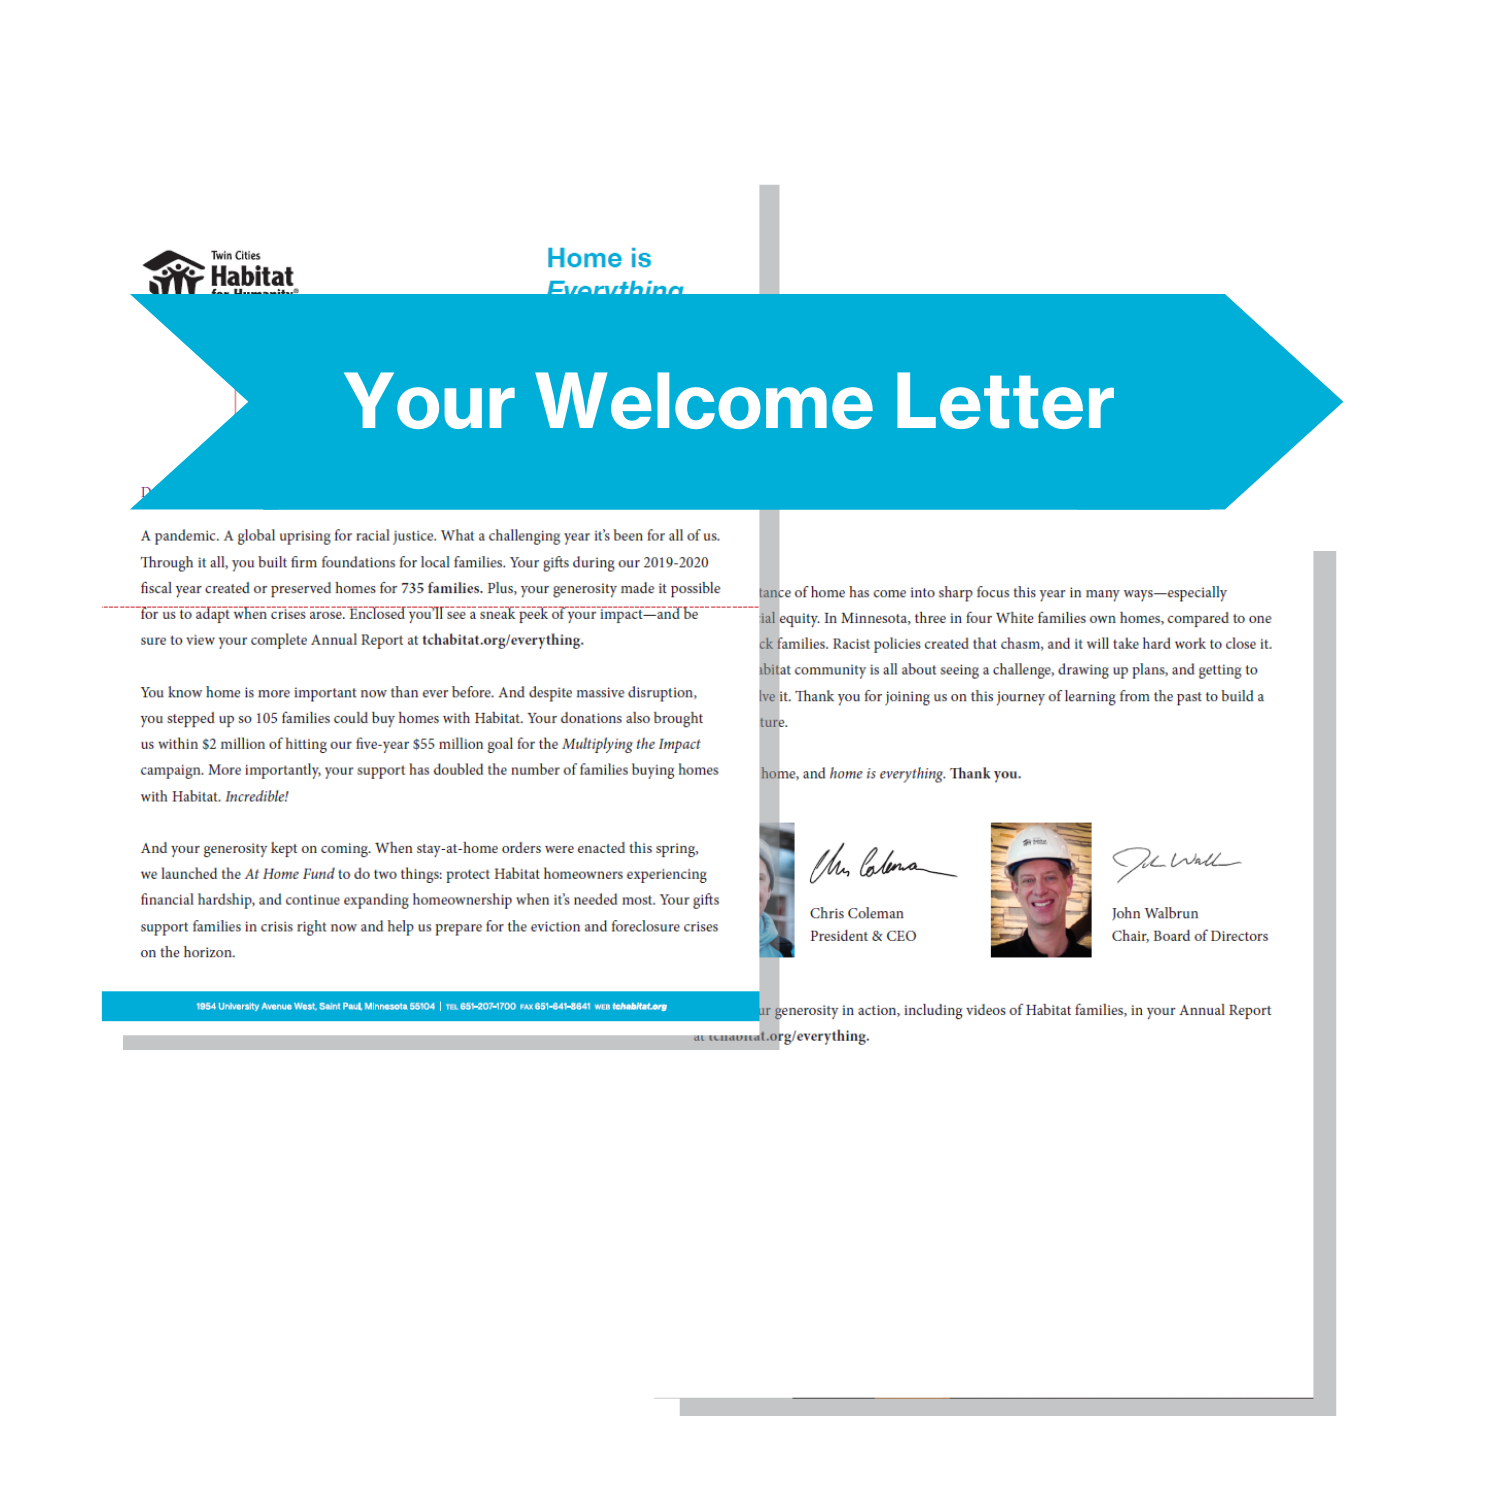 Your Welcome Letter Feature